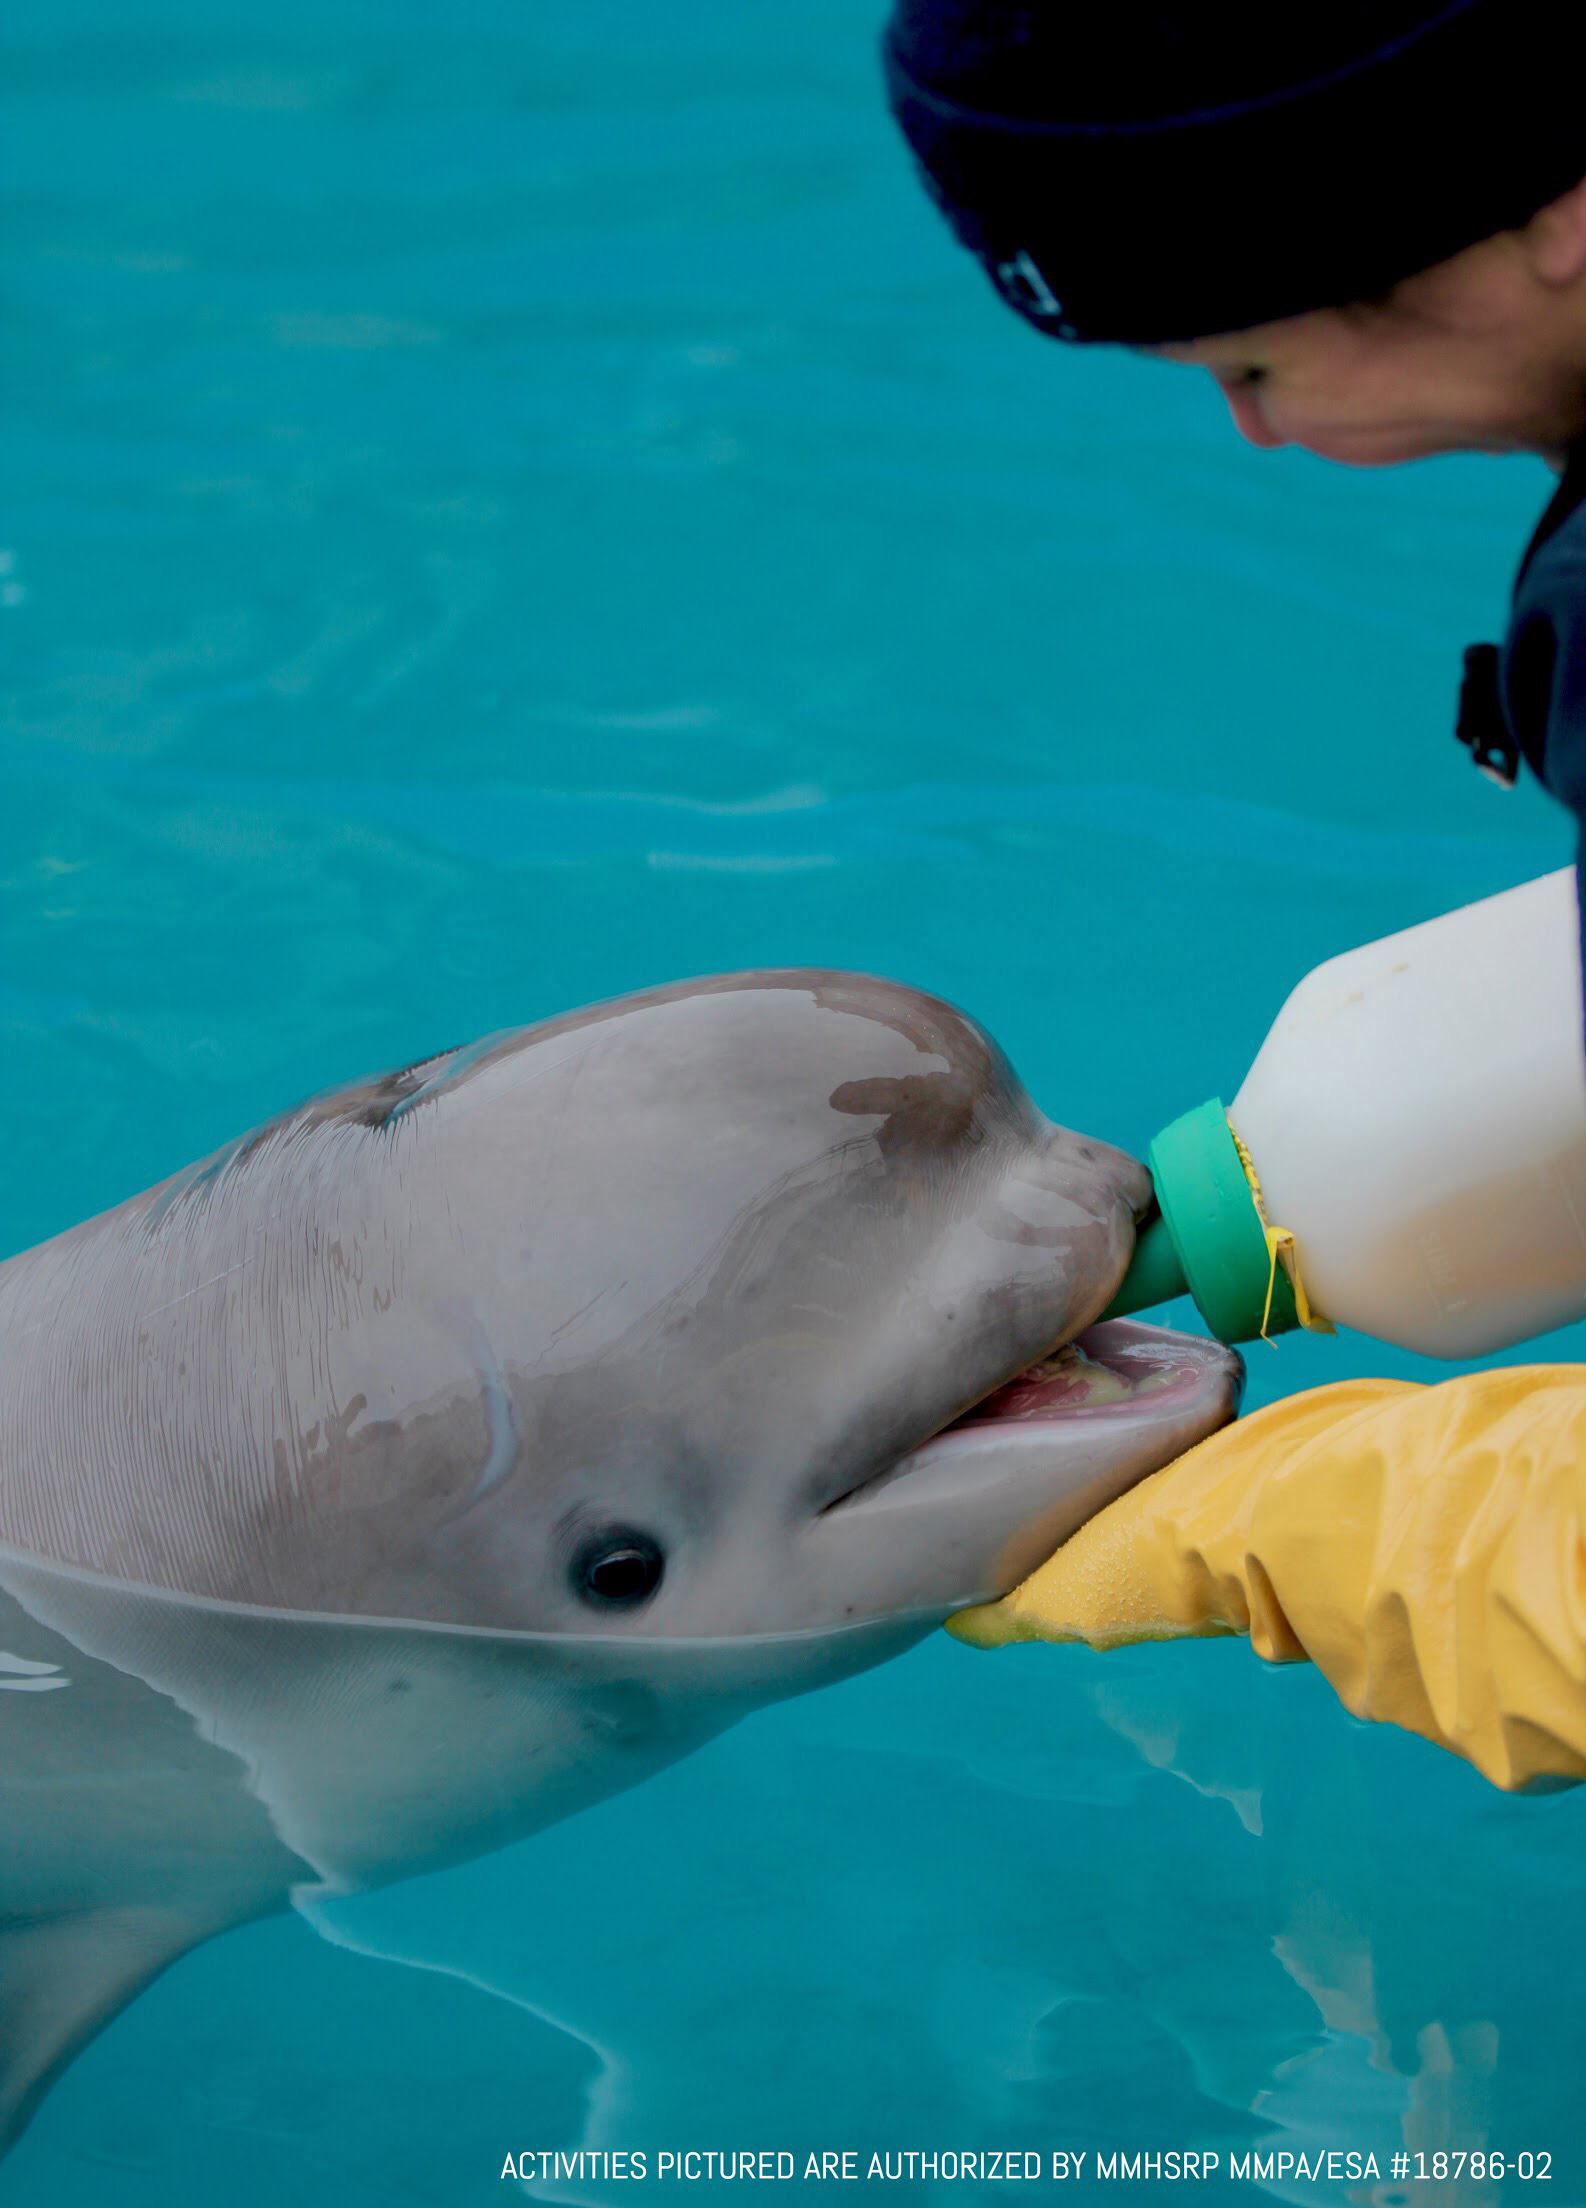 From Alaska to Texas: New home announced for beluga whale calf ...